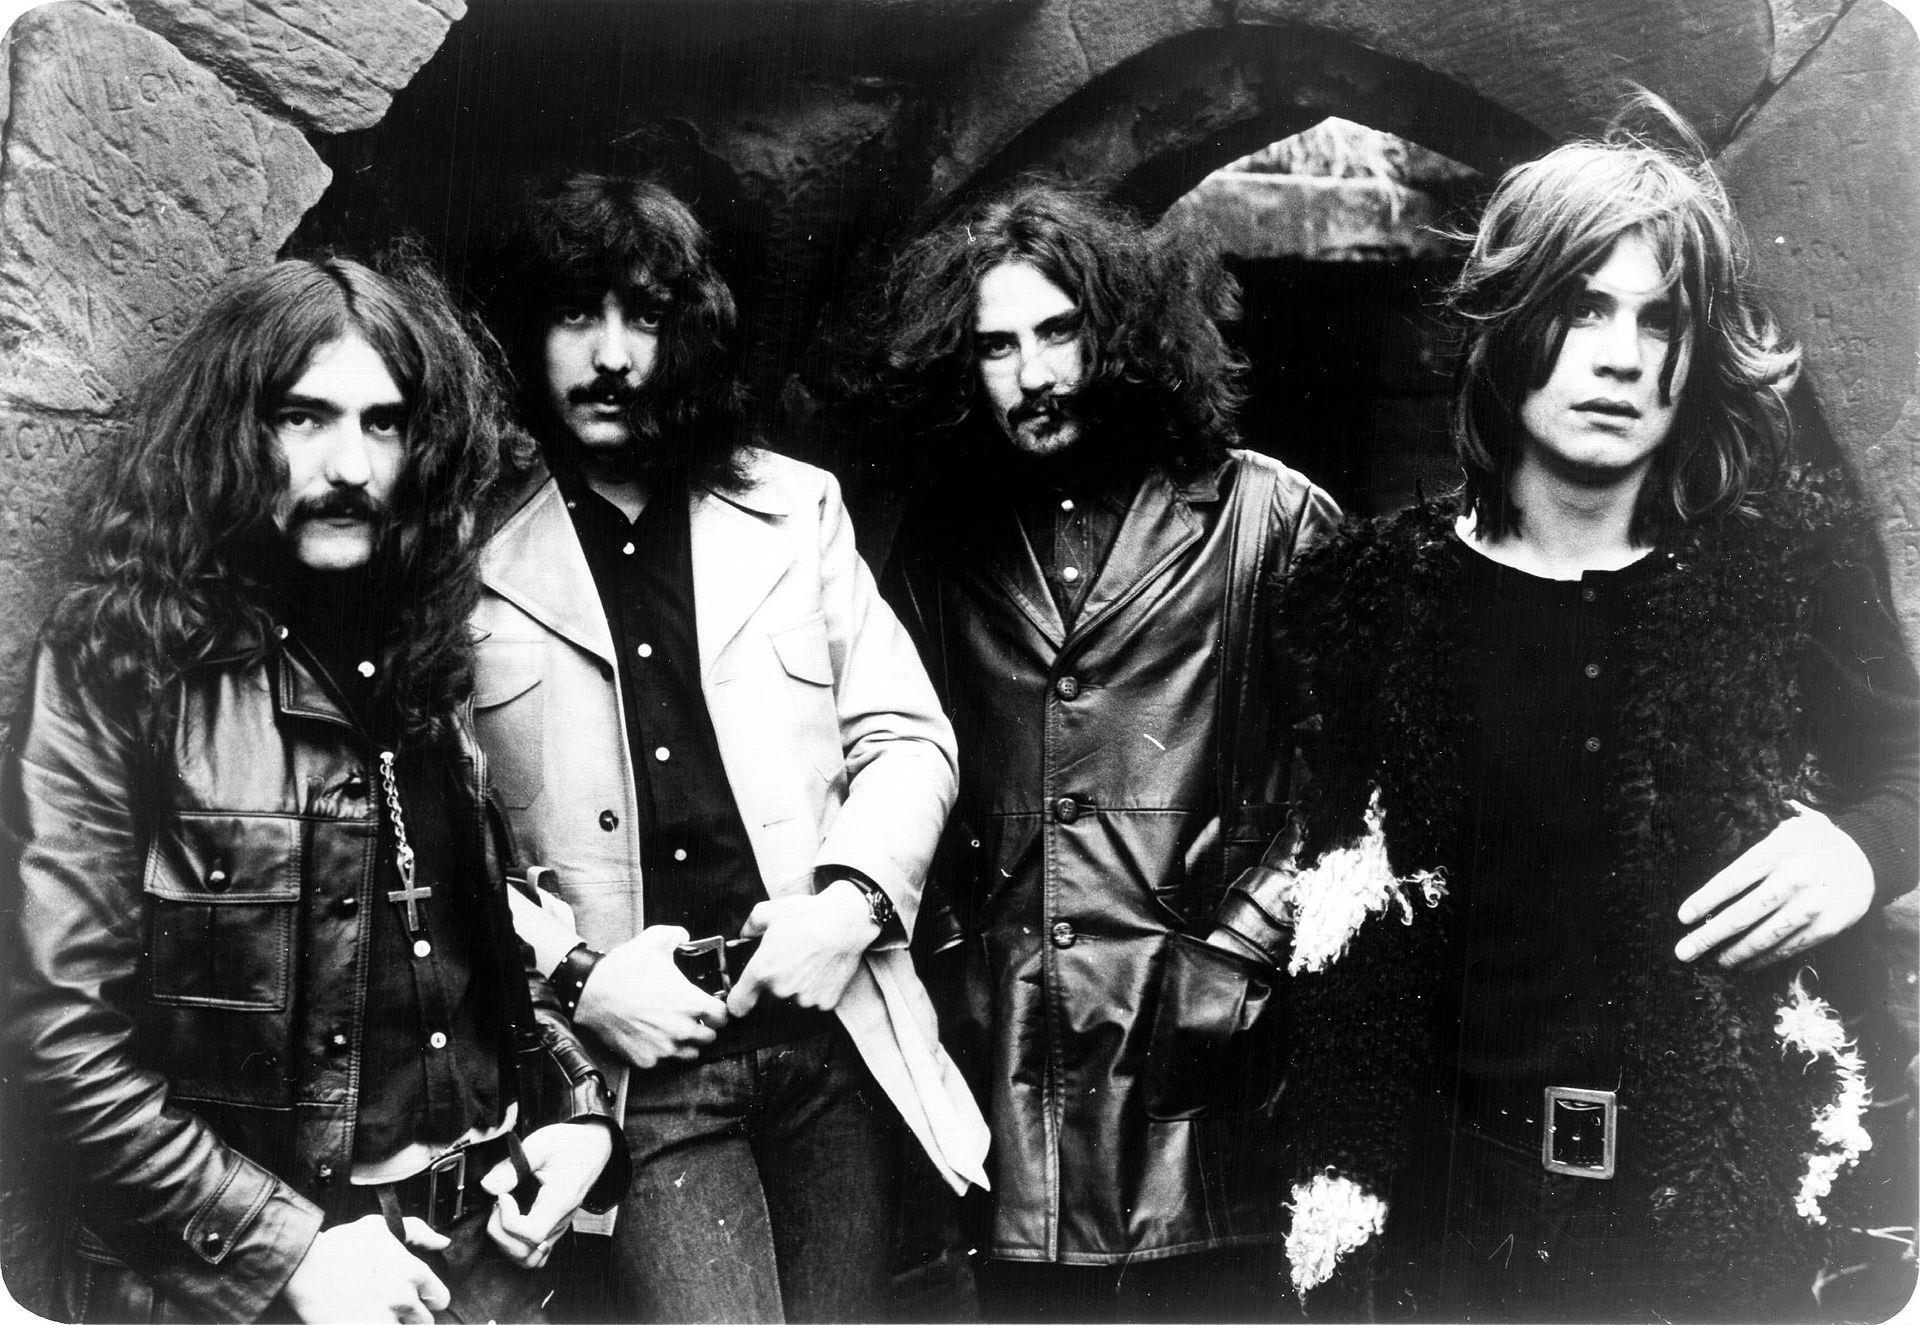 <p>This band didn't beat around the bush when it came to quitting after <a href="https://www.rollingstone.com/music/music-features/black-sabbath-debut-album-heavy-metal-origin-interview-949070/">more than 30 years together</a>. Their final tour was even called "The Last Supper."</p>